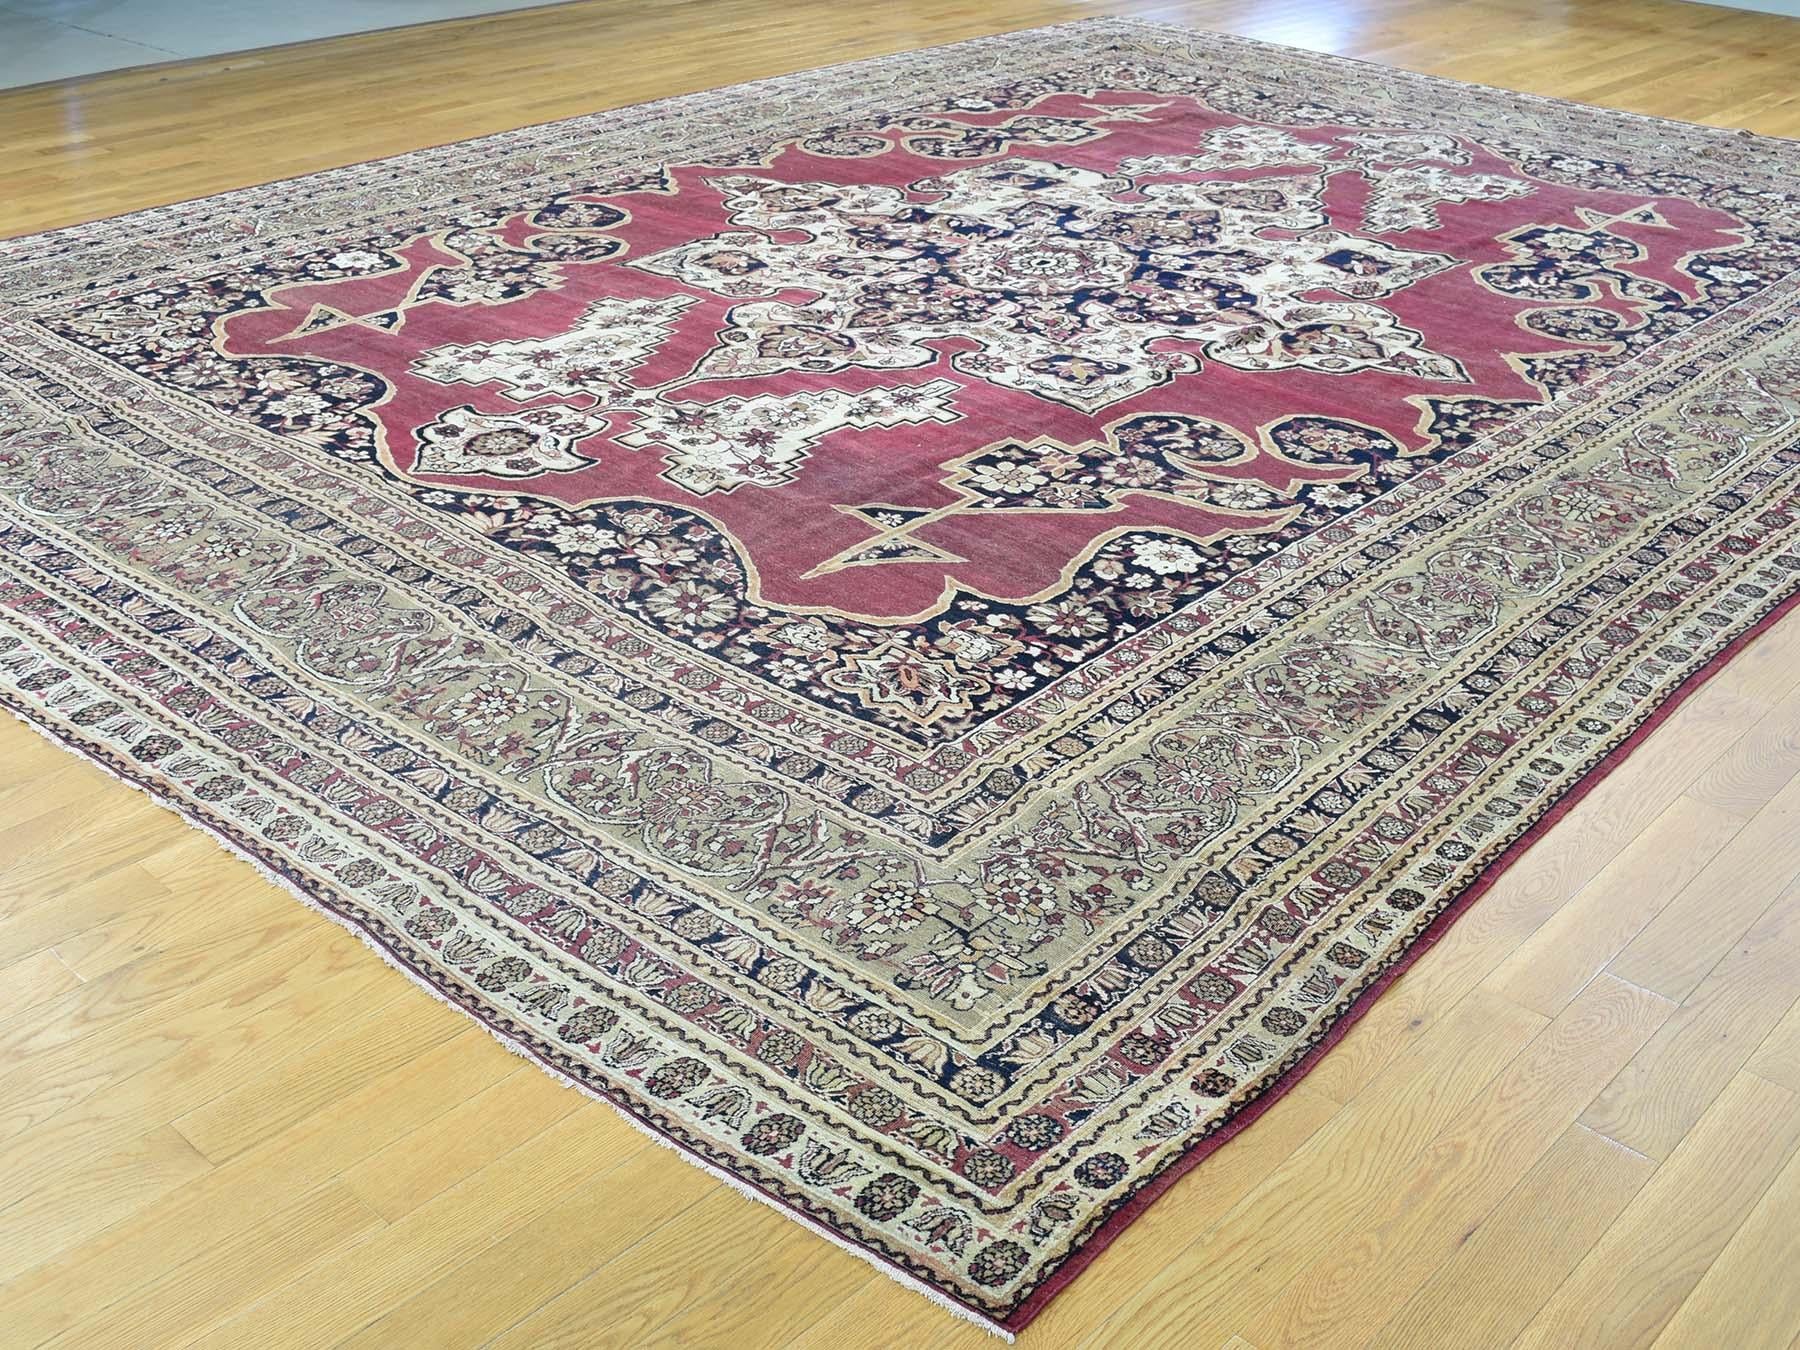 1880 Antique Persian Lavar Kerman Rug In Good Condition For Sale In Carlstadt, NJ